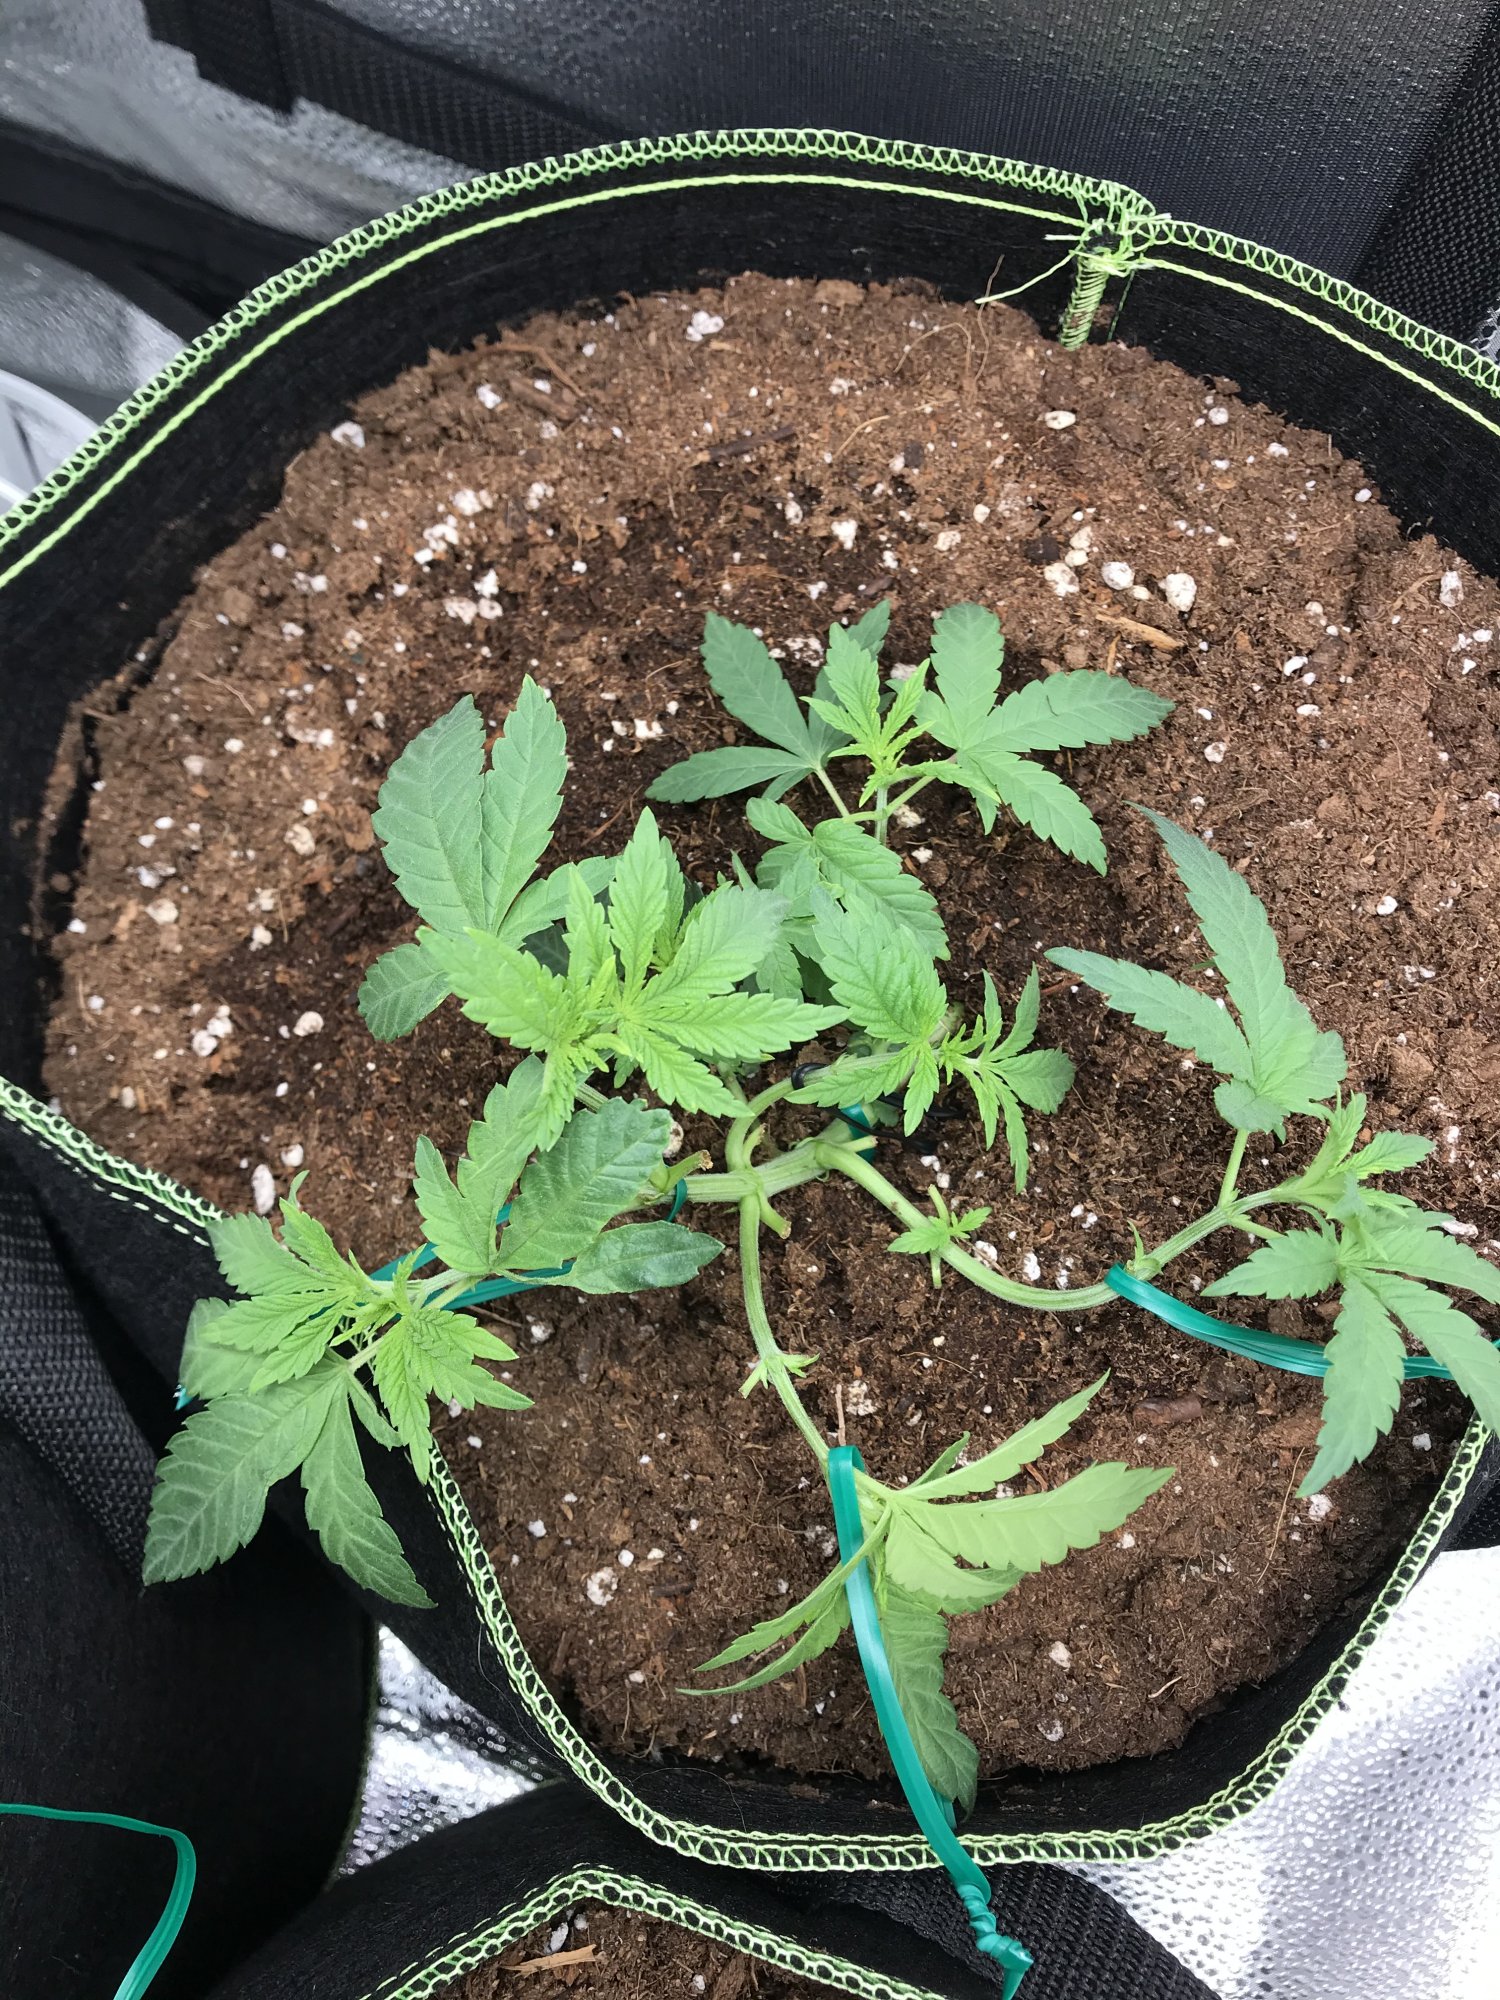 New to this forum and indoor growing any help would be much appreciated pictures in thread 4